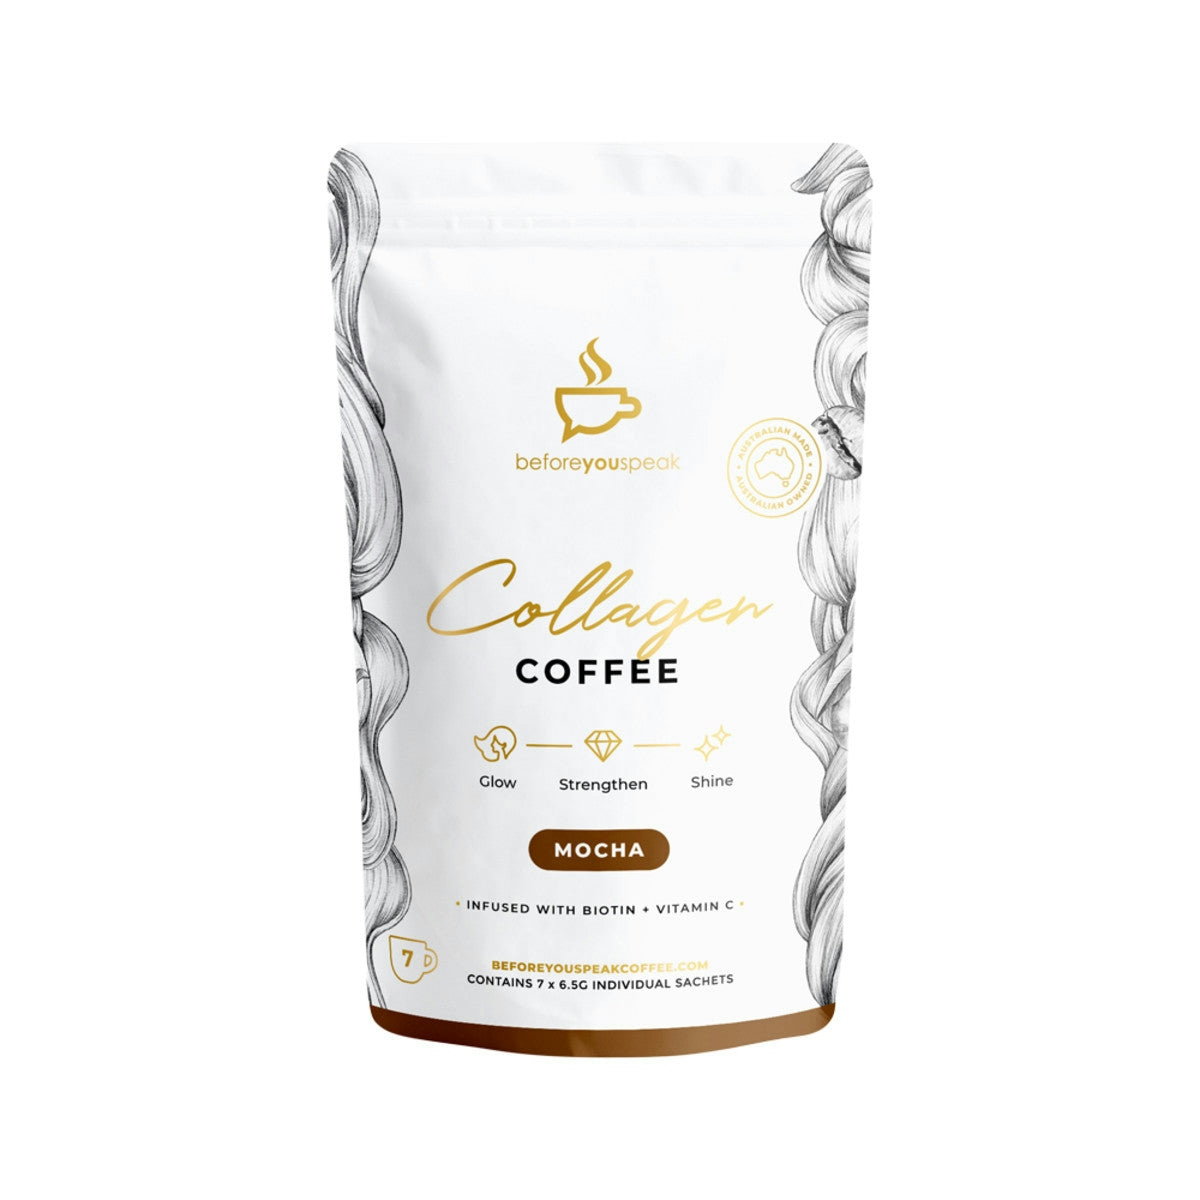 image of Before You Speak Collagen Coffee Mocha 6.5g x 7 Pack on white background